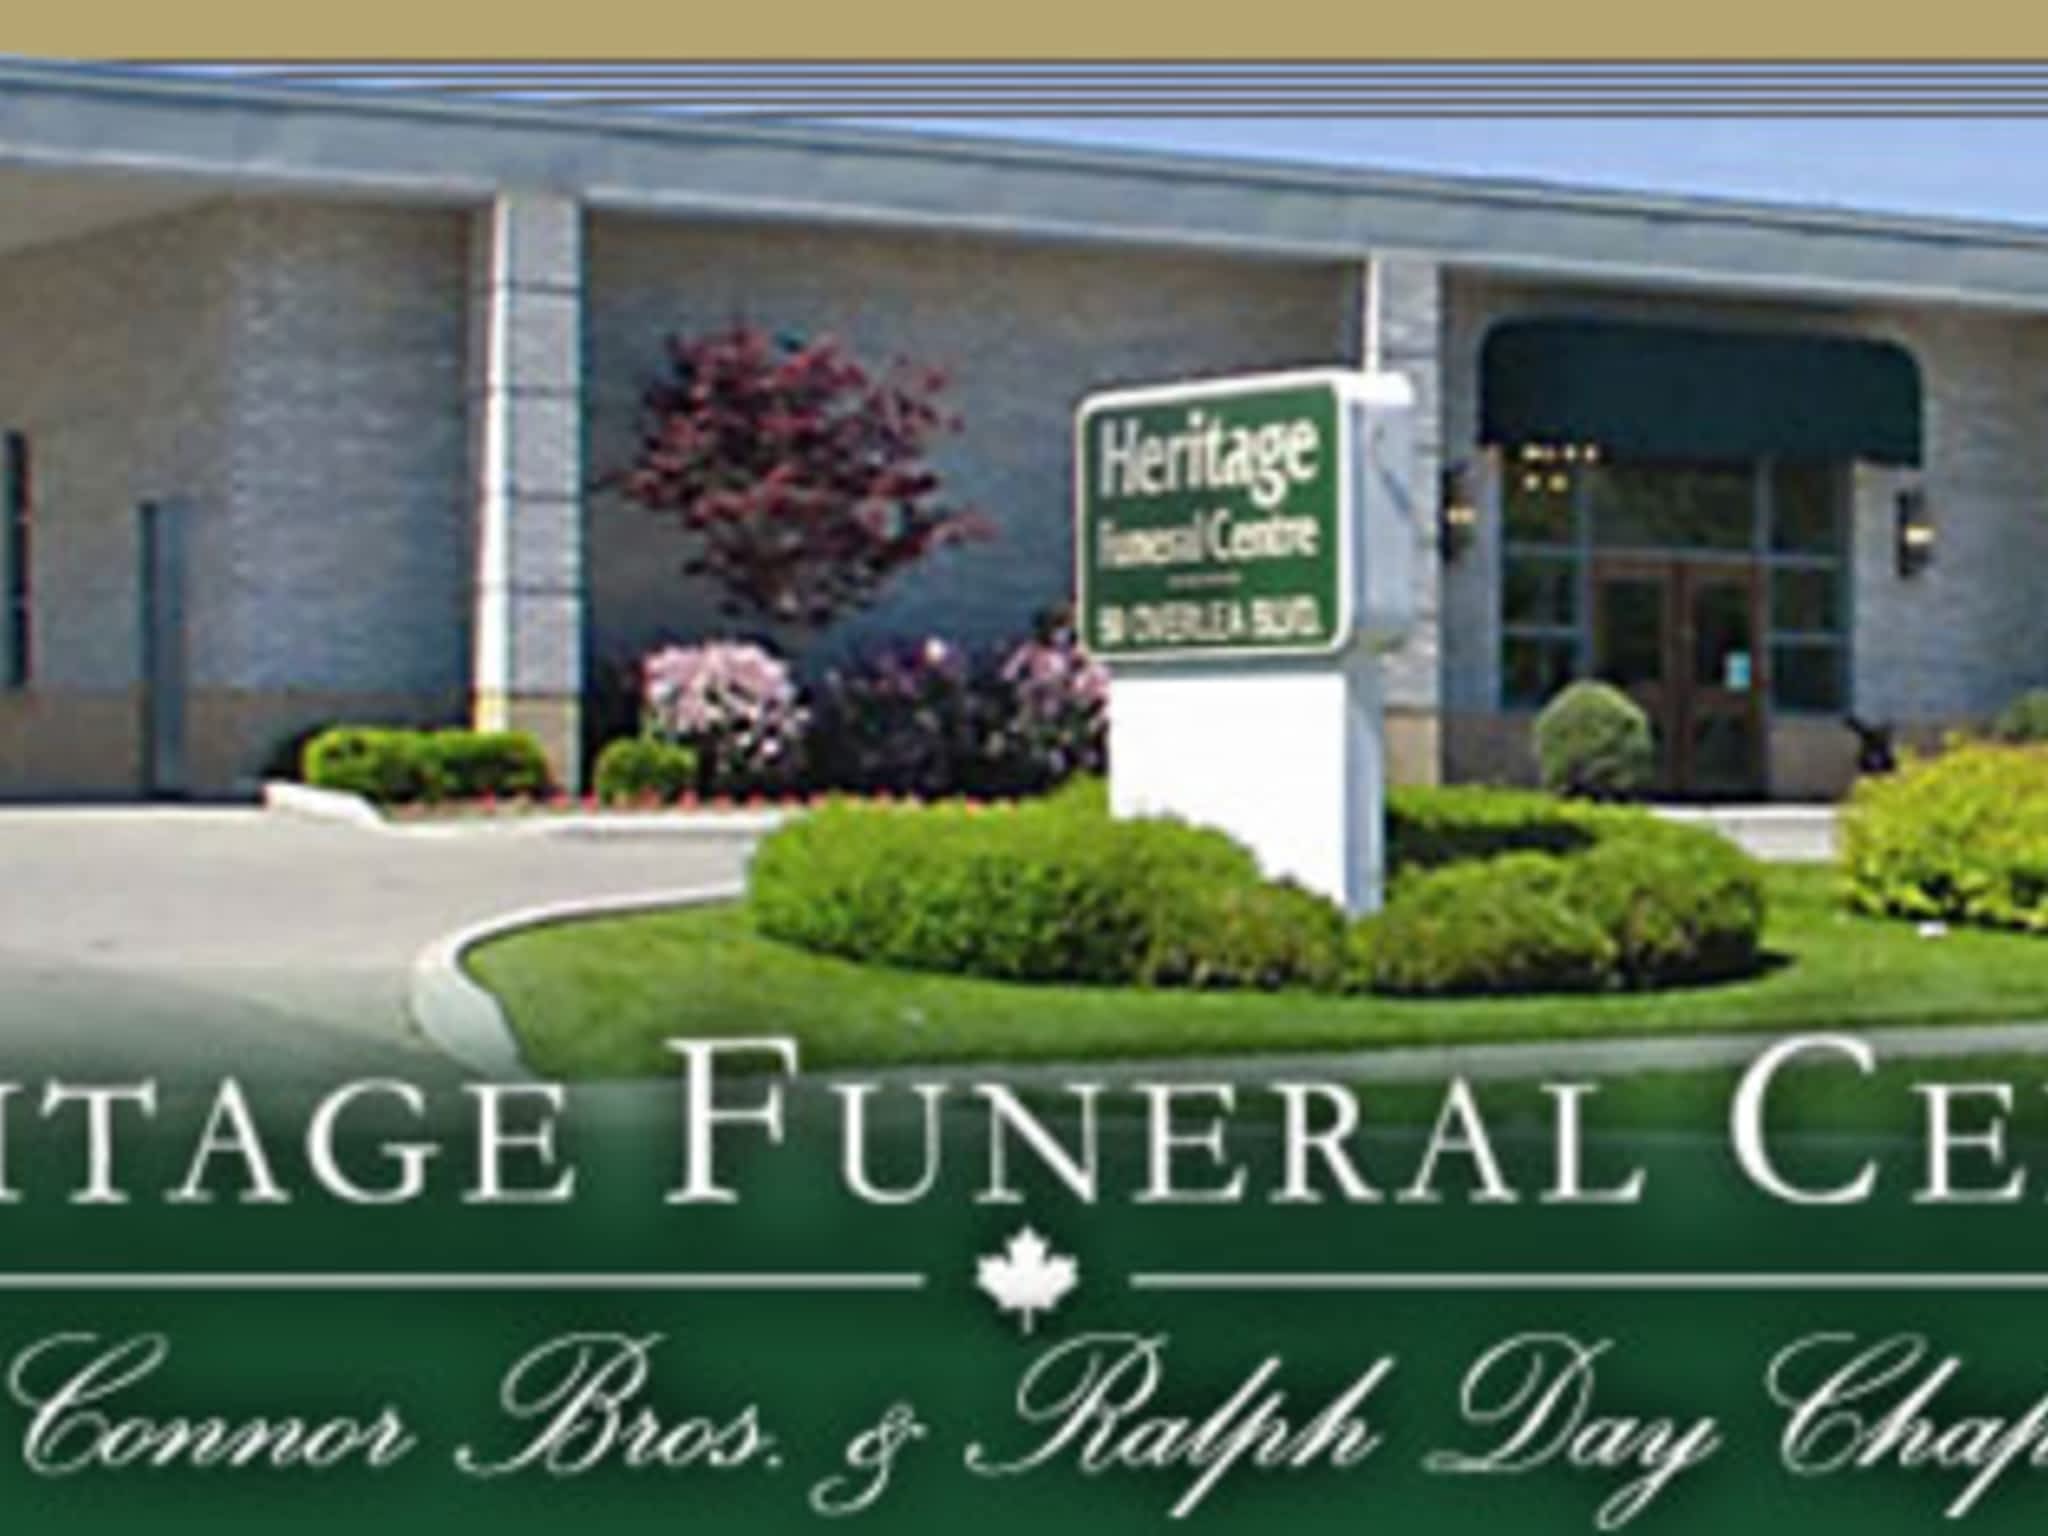 photo Heritage Funeral Centre